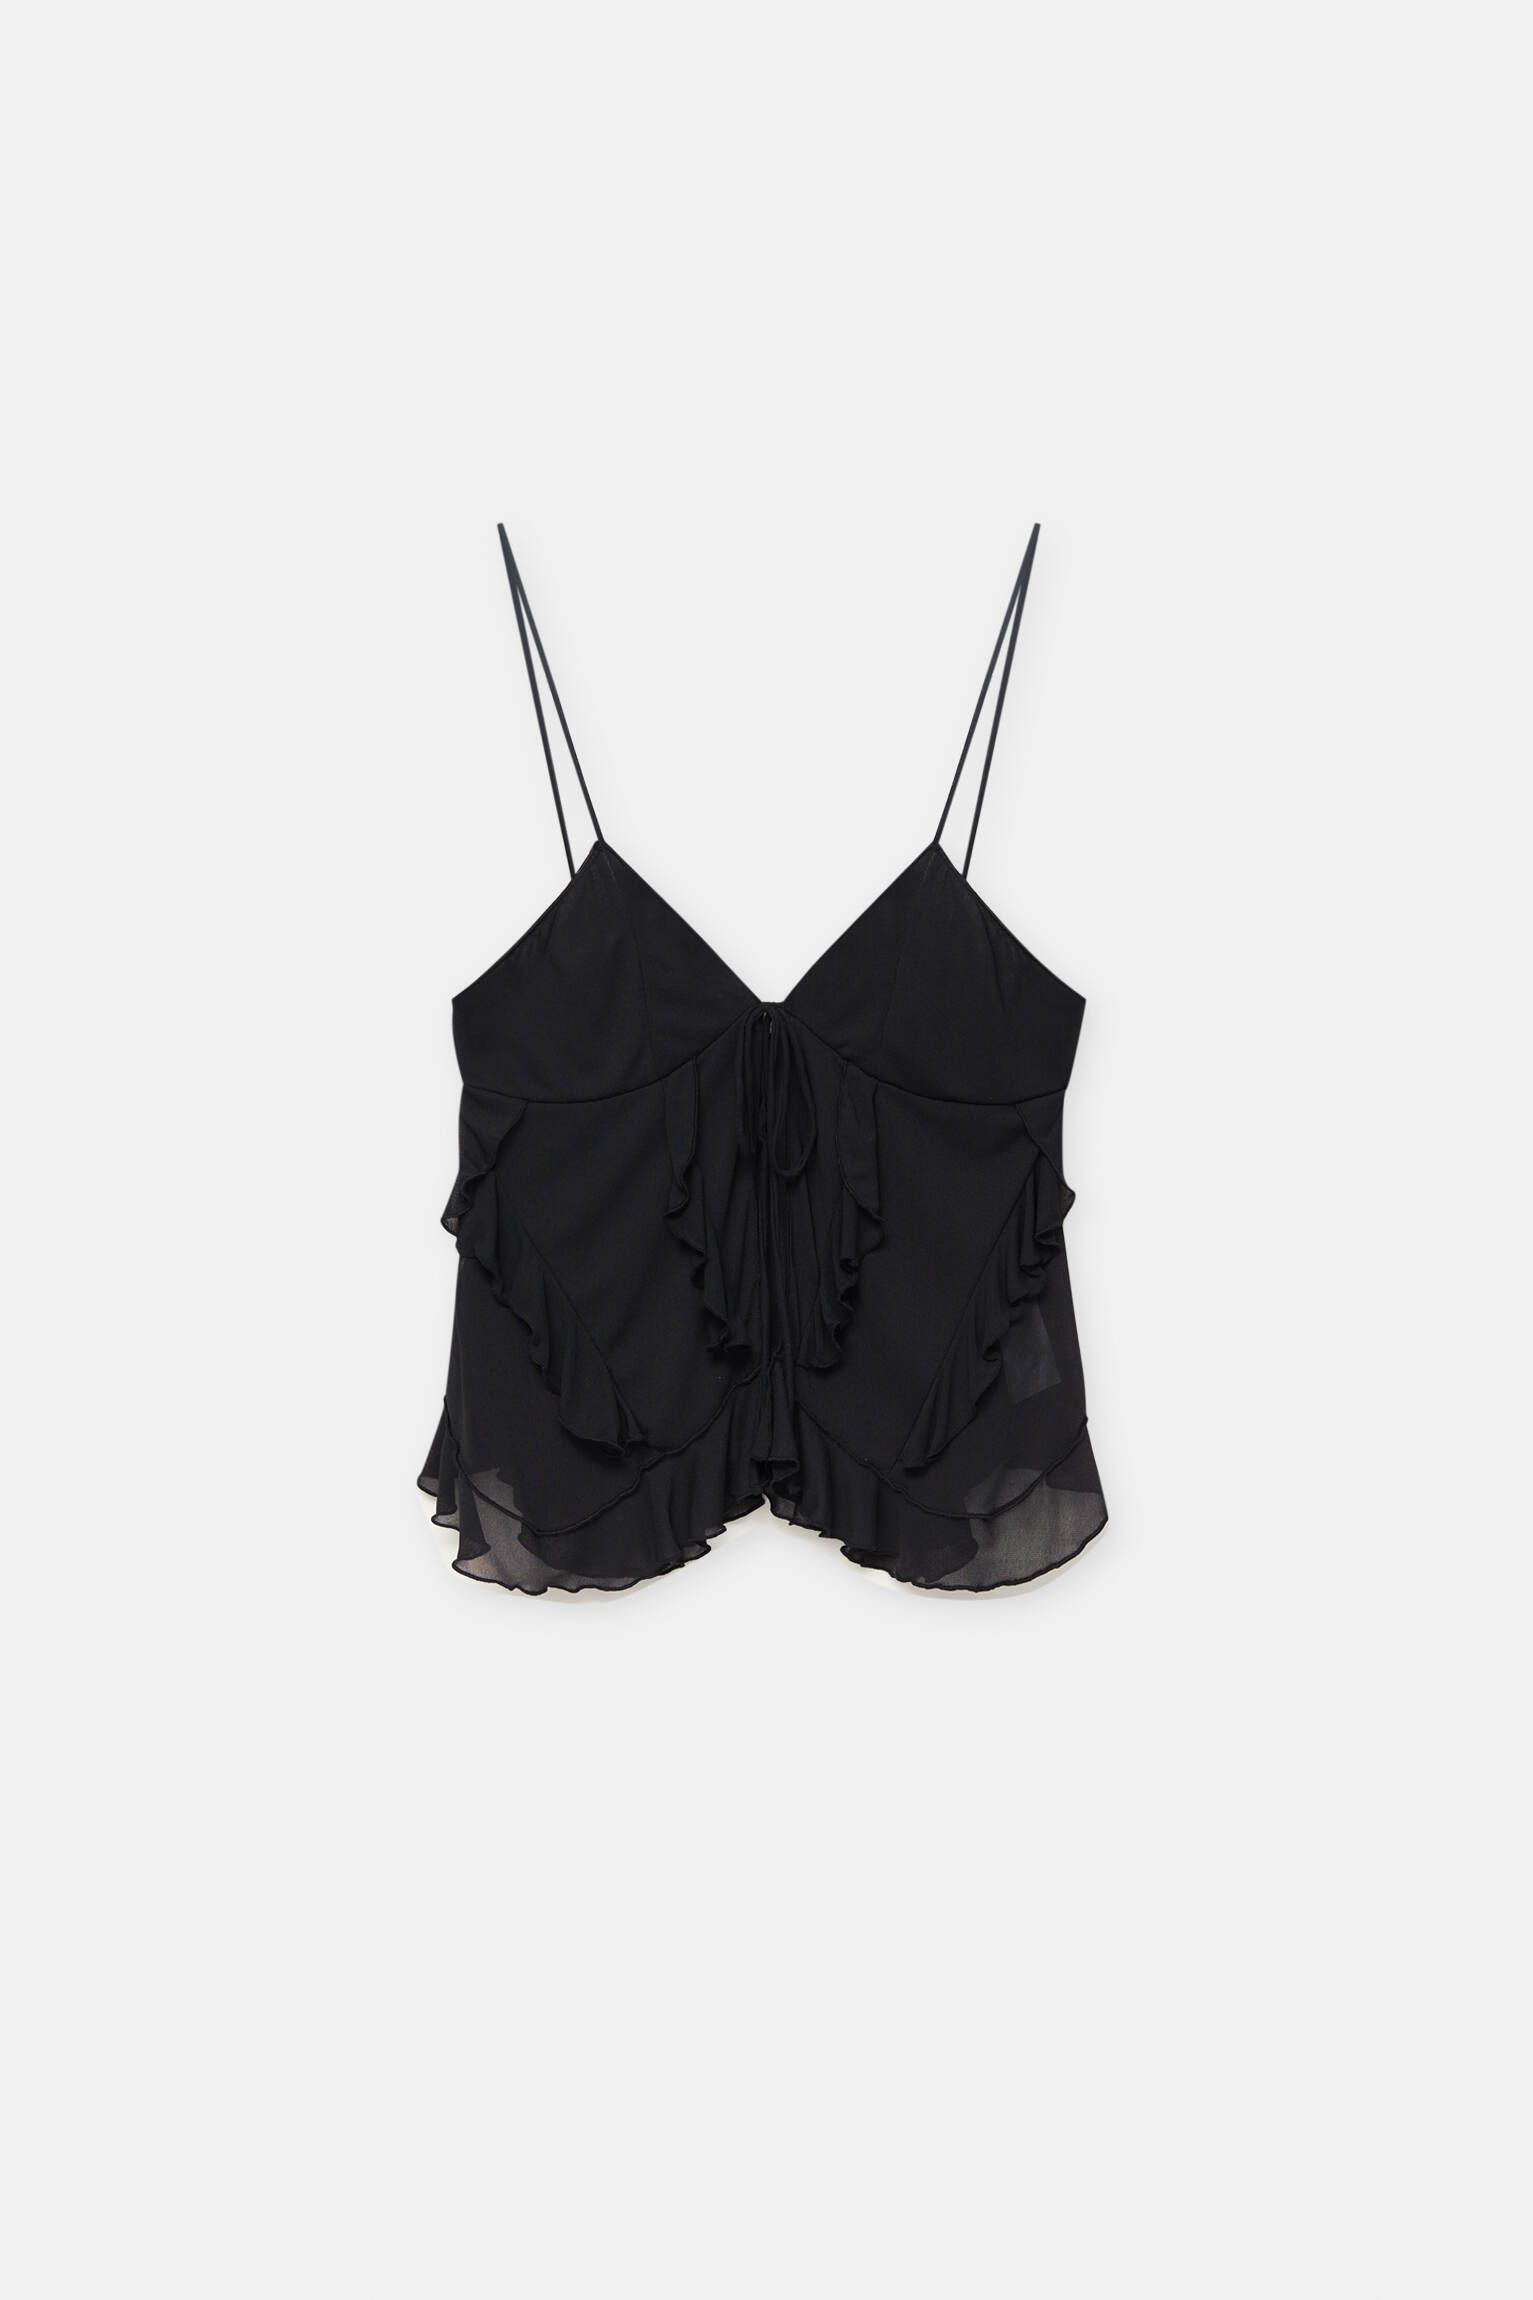 Stylish Strapless Camisole for Versatile Layering